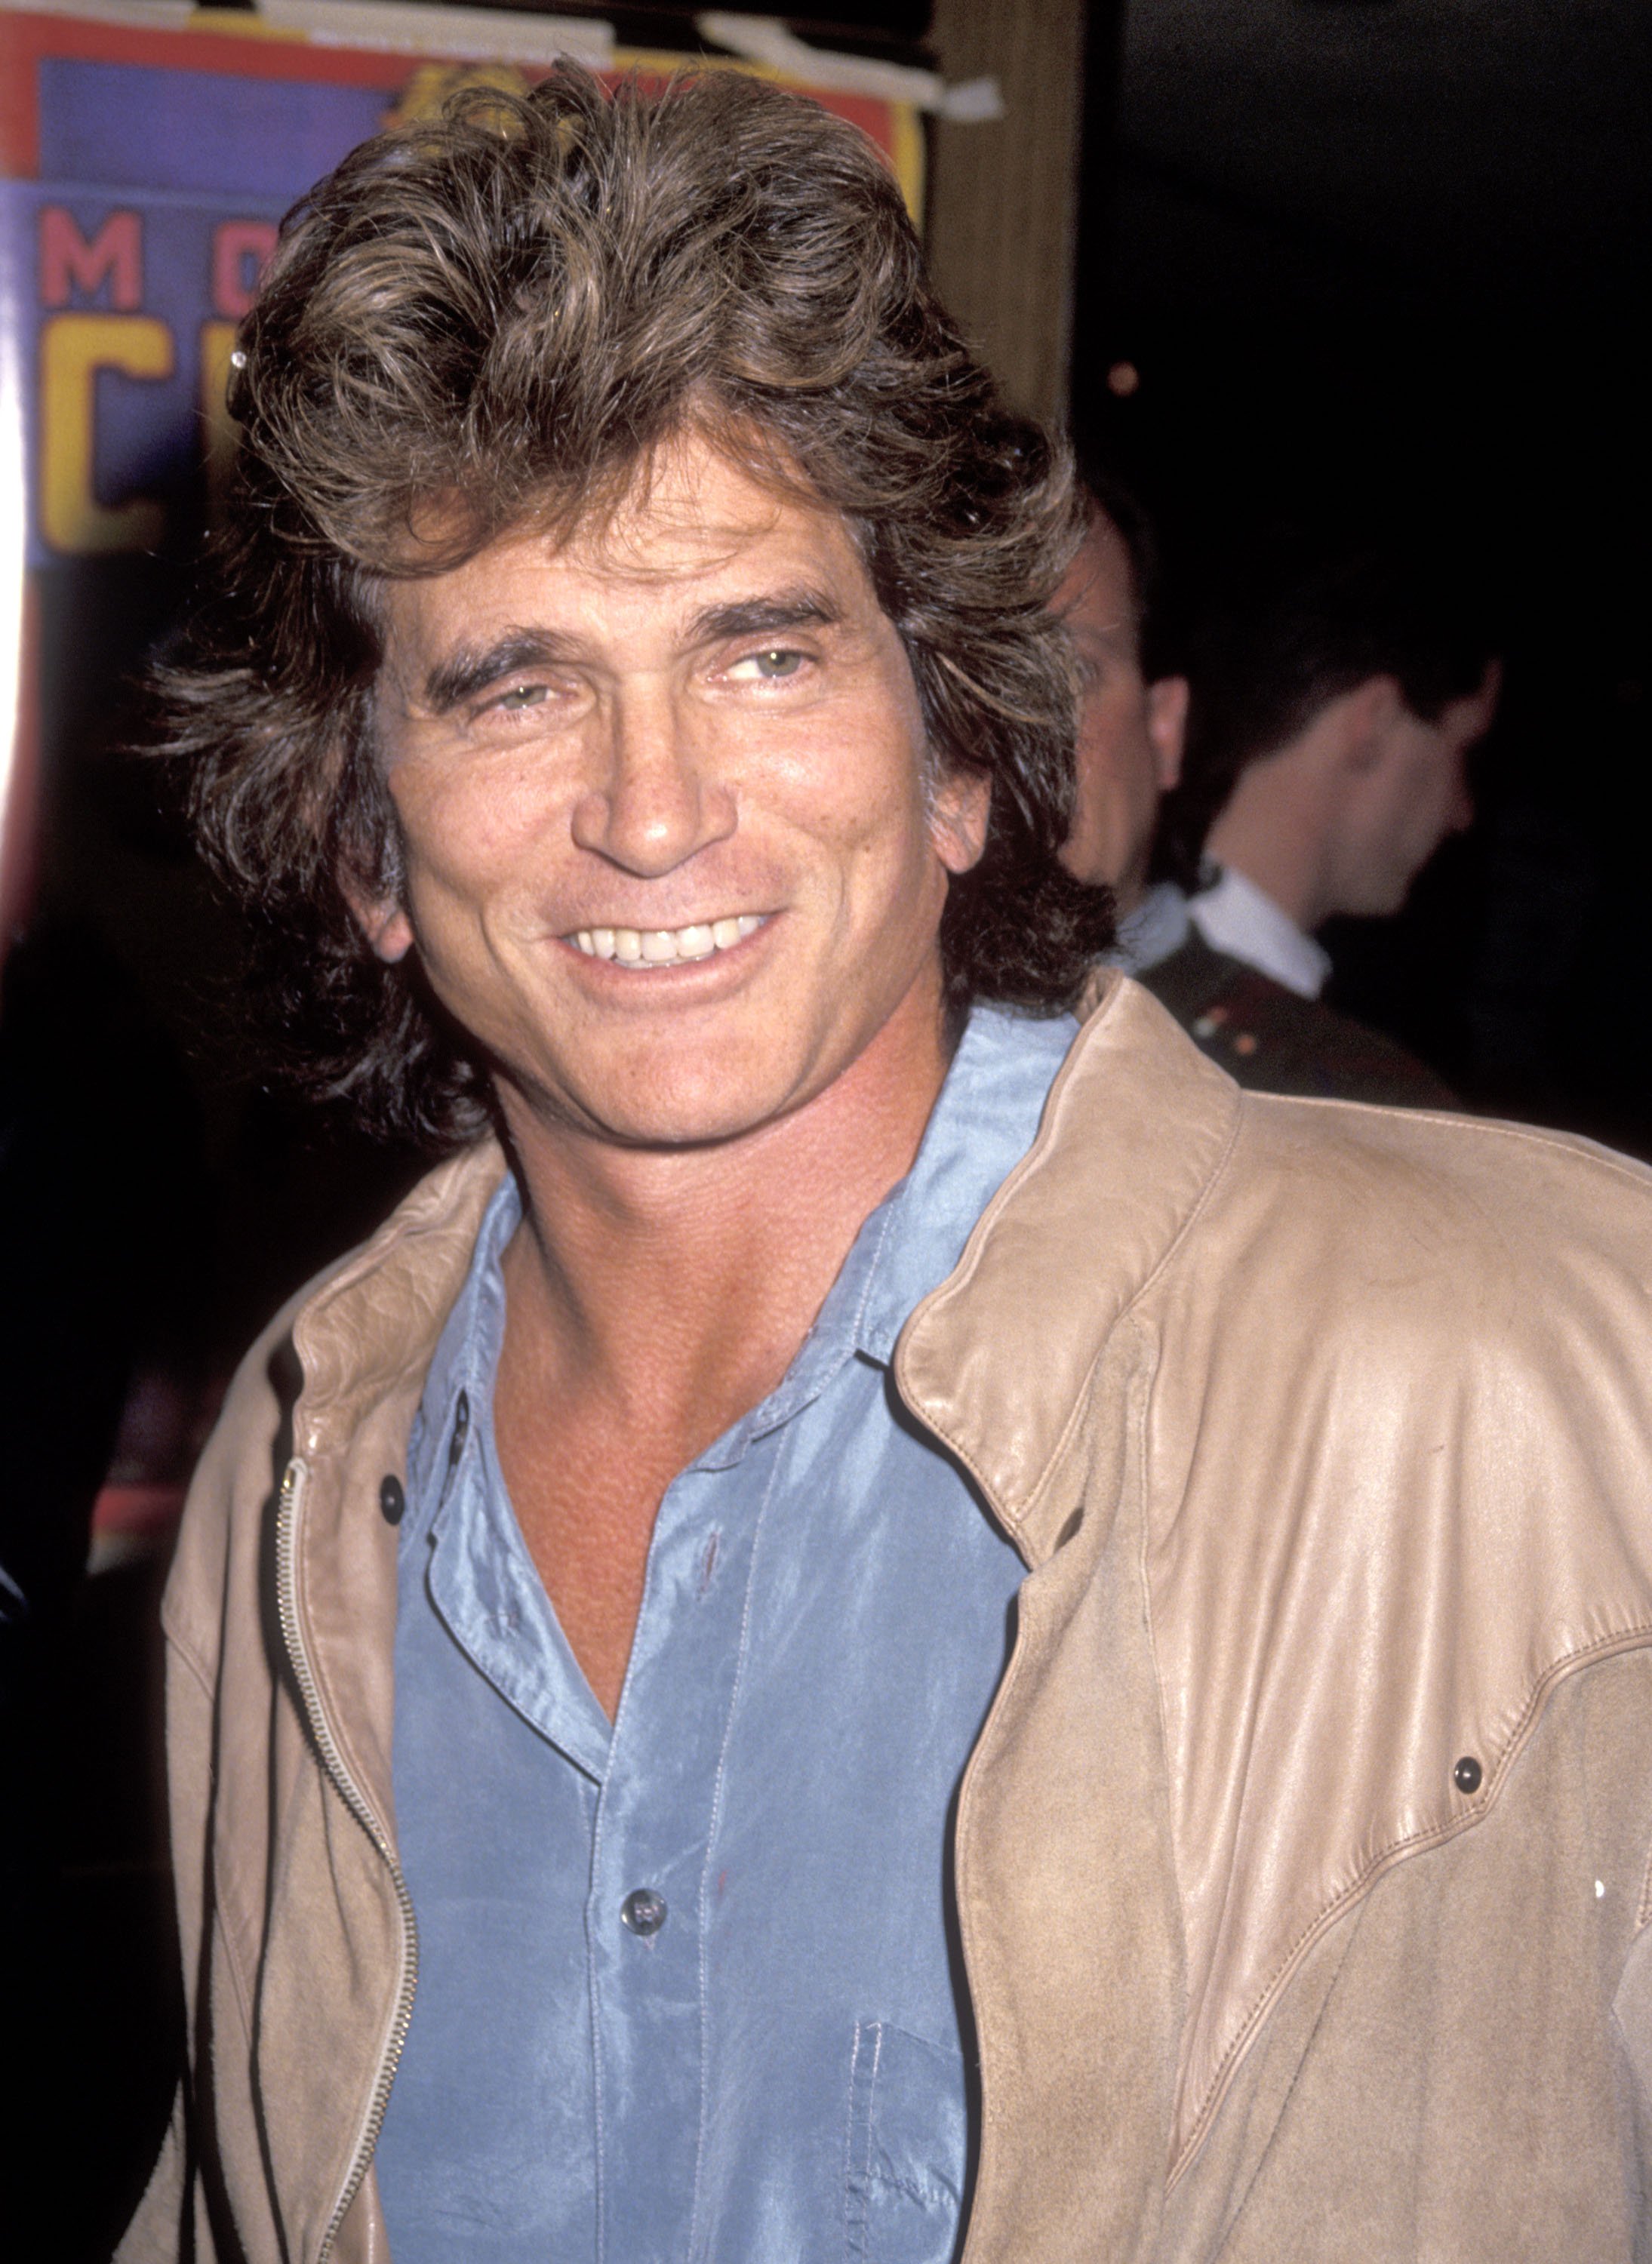 Michael Landon on March 6, 1991 at the Great Western Forum in Inglewood, California | Source: Getty Images